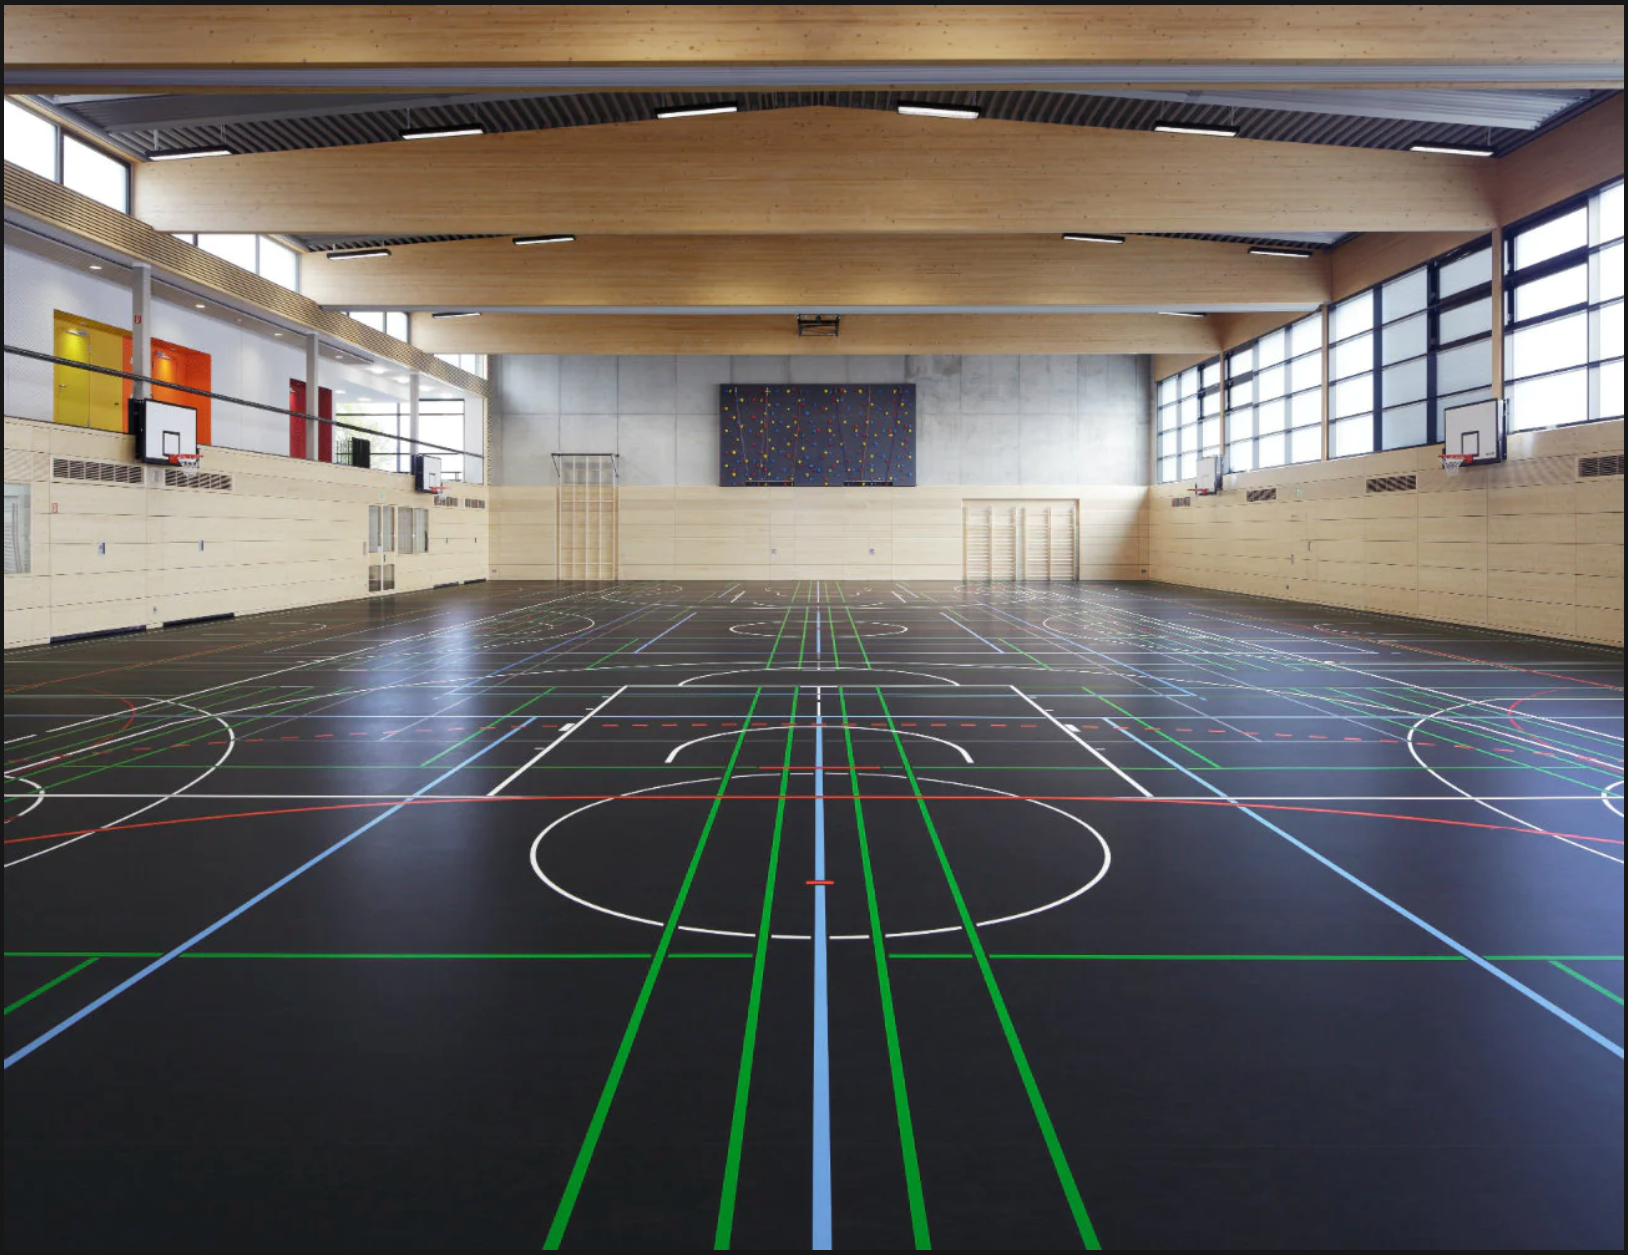 Contrasting Black Sports Flooring with Bright Coloured Sports Line Markings